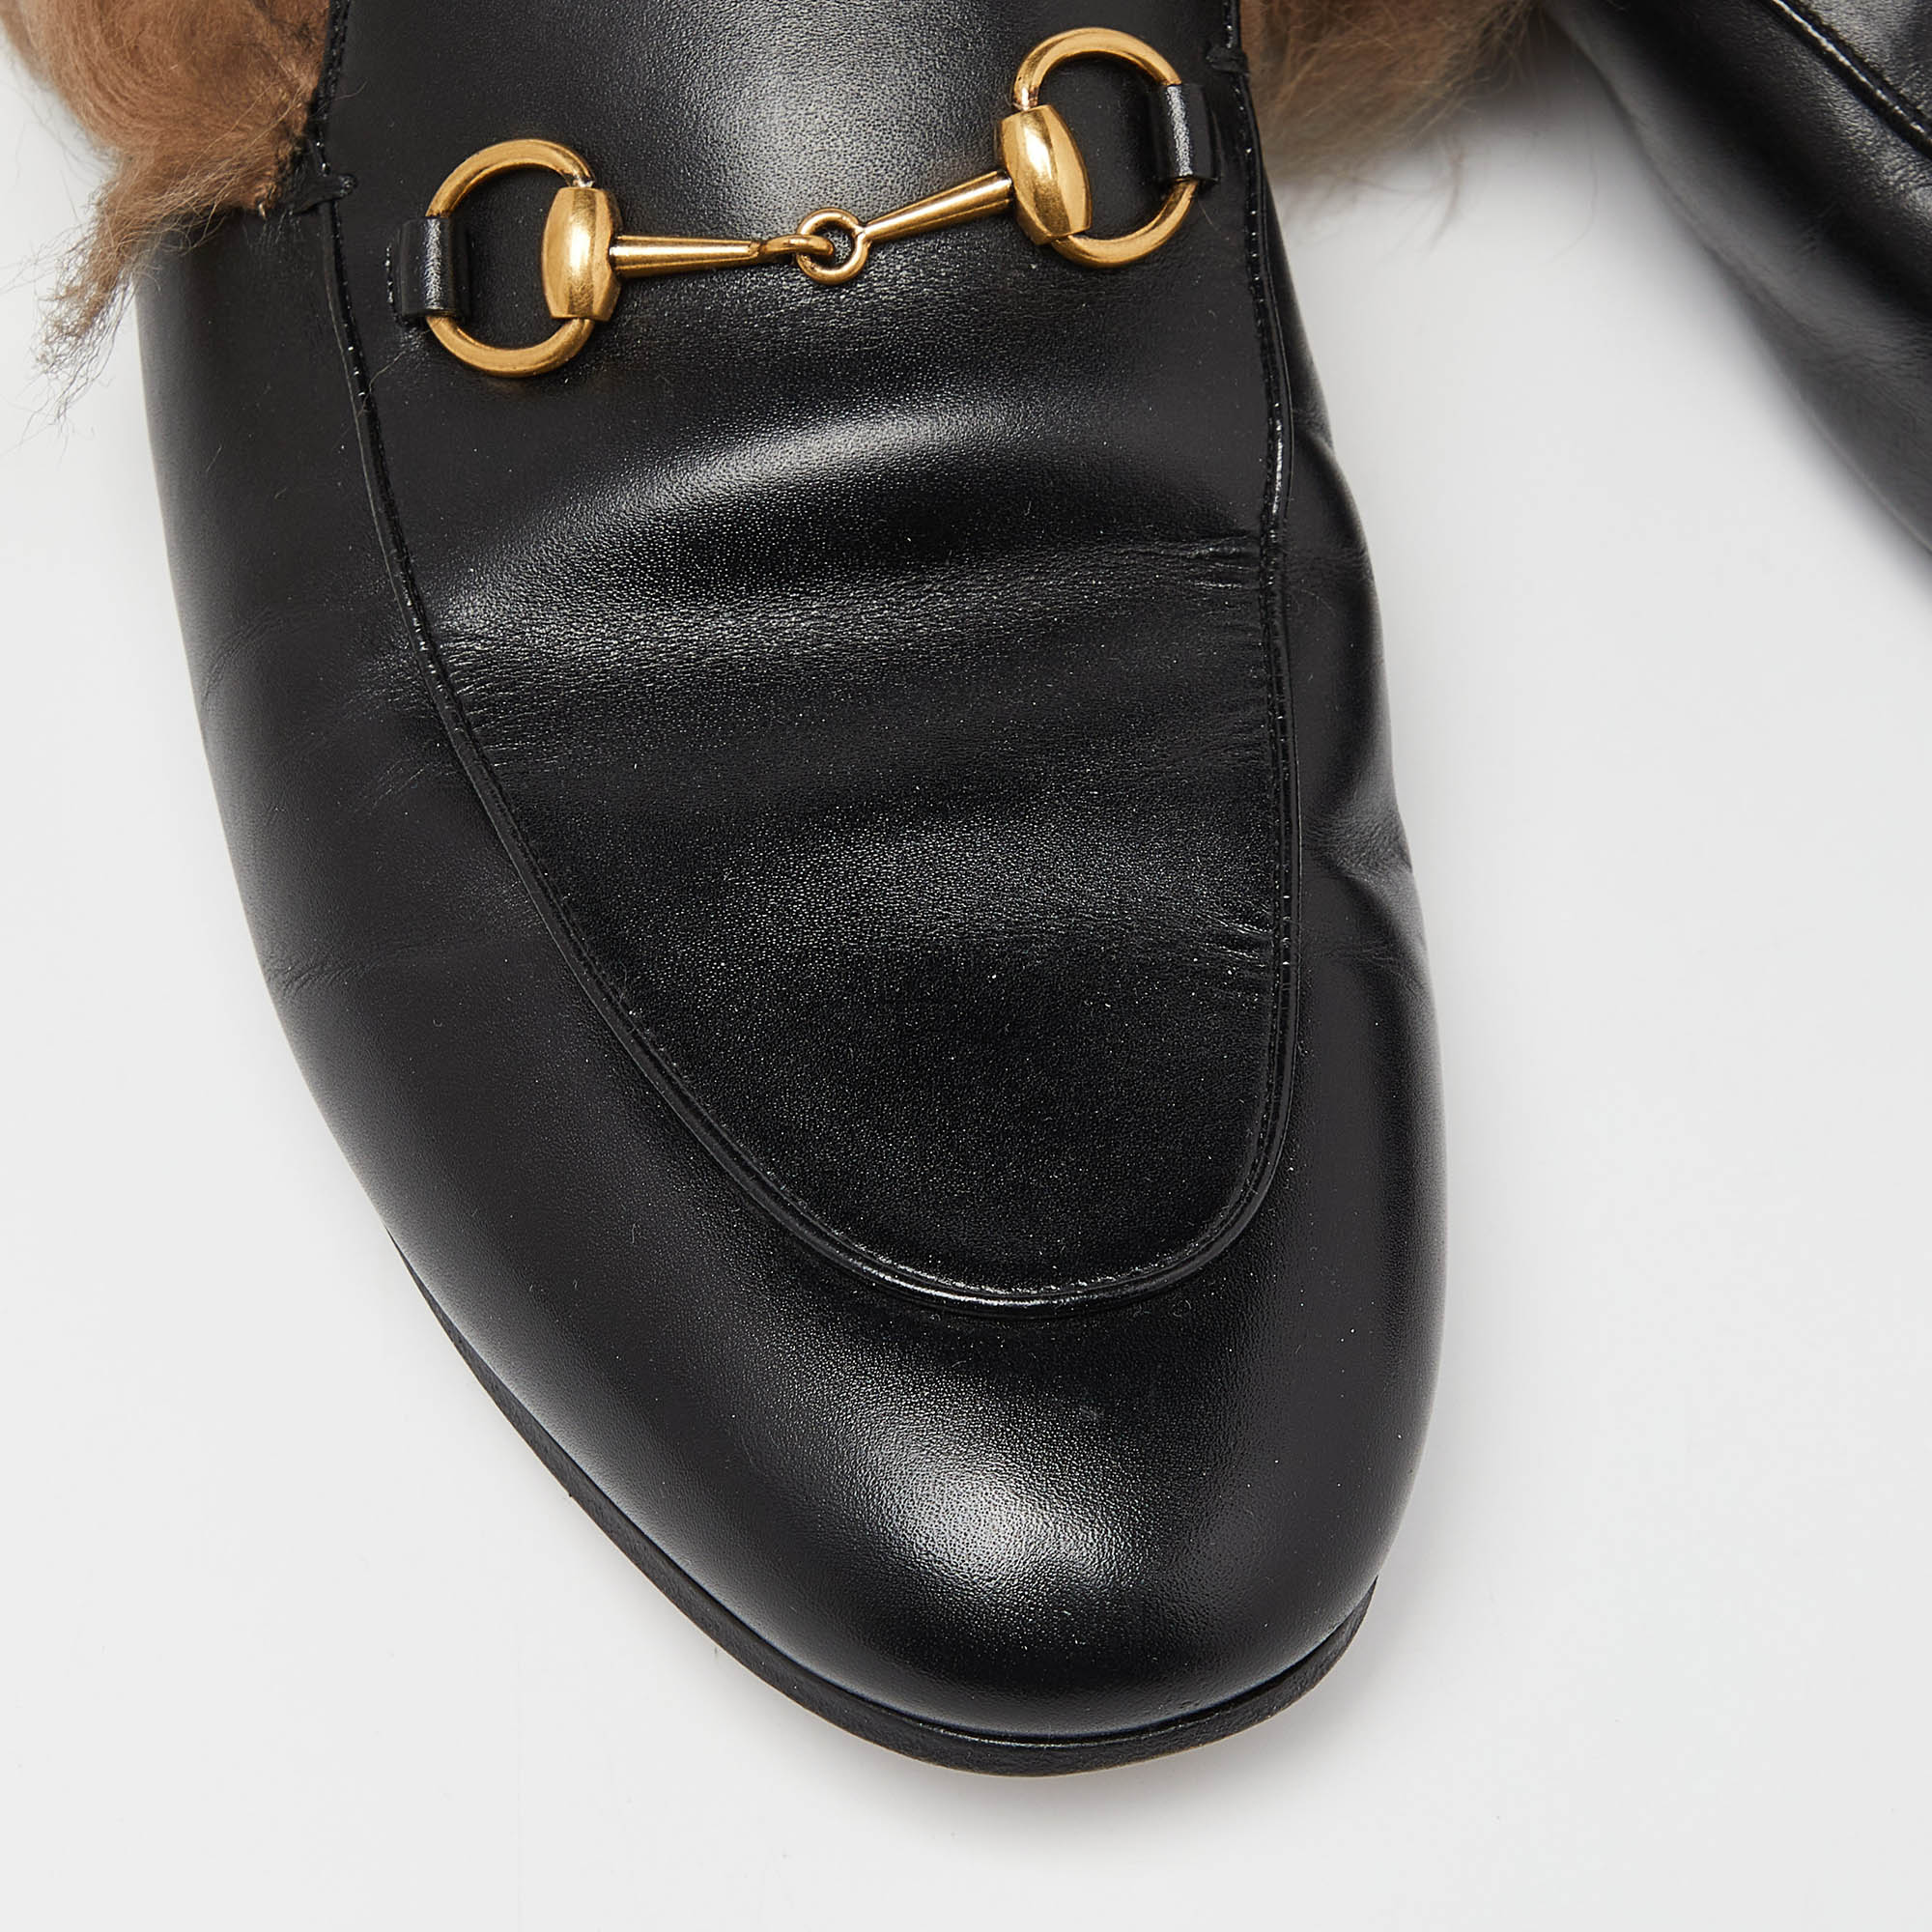 Gucci Black Leather And Fur Princetown Flat Mules Size 41